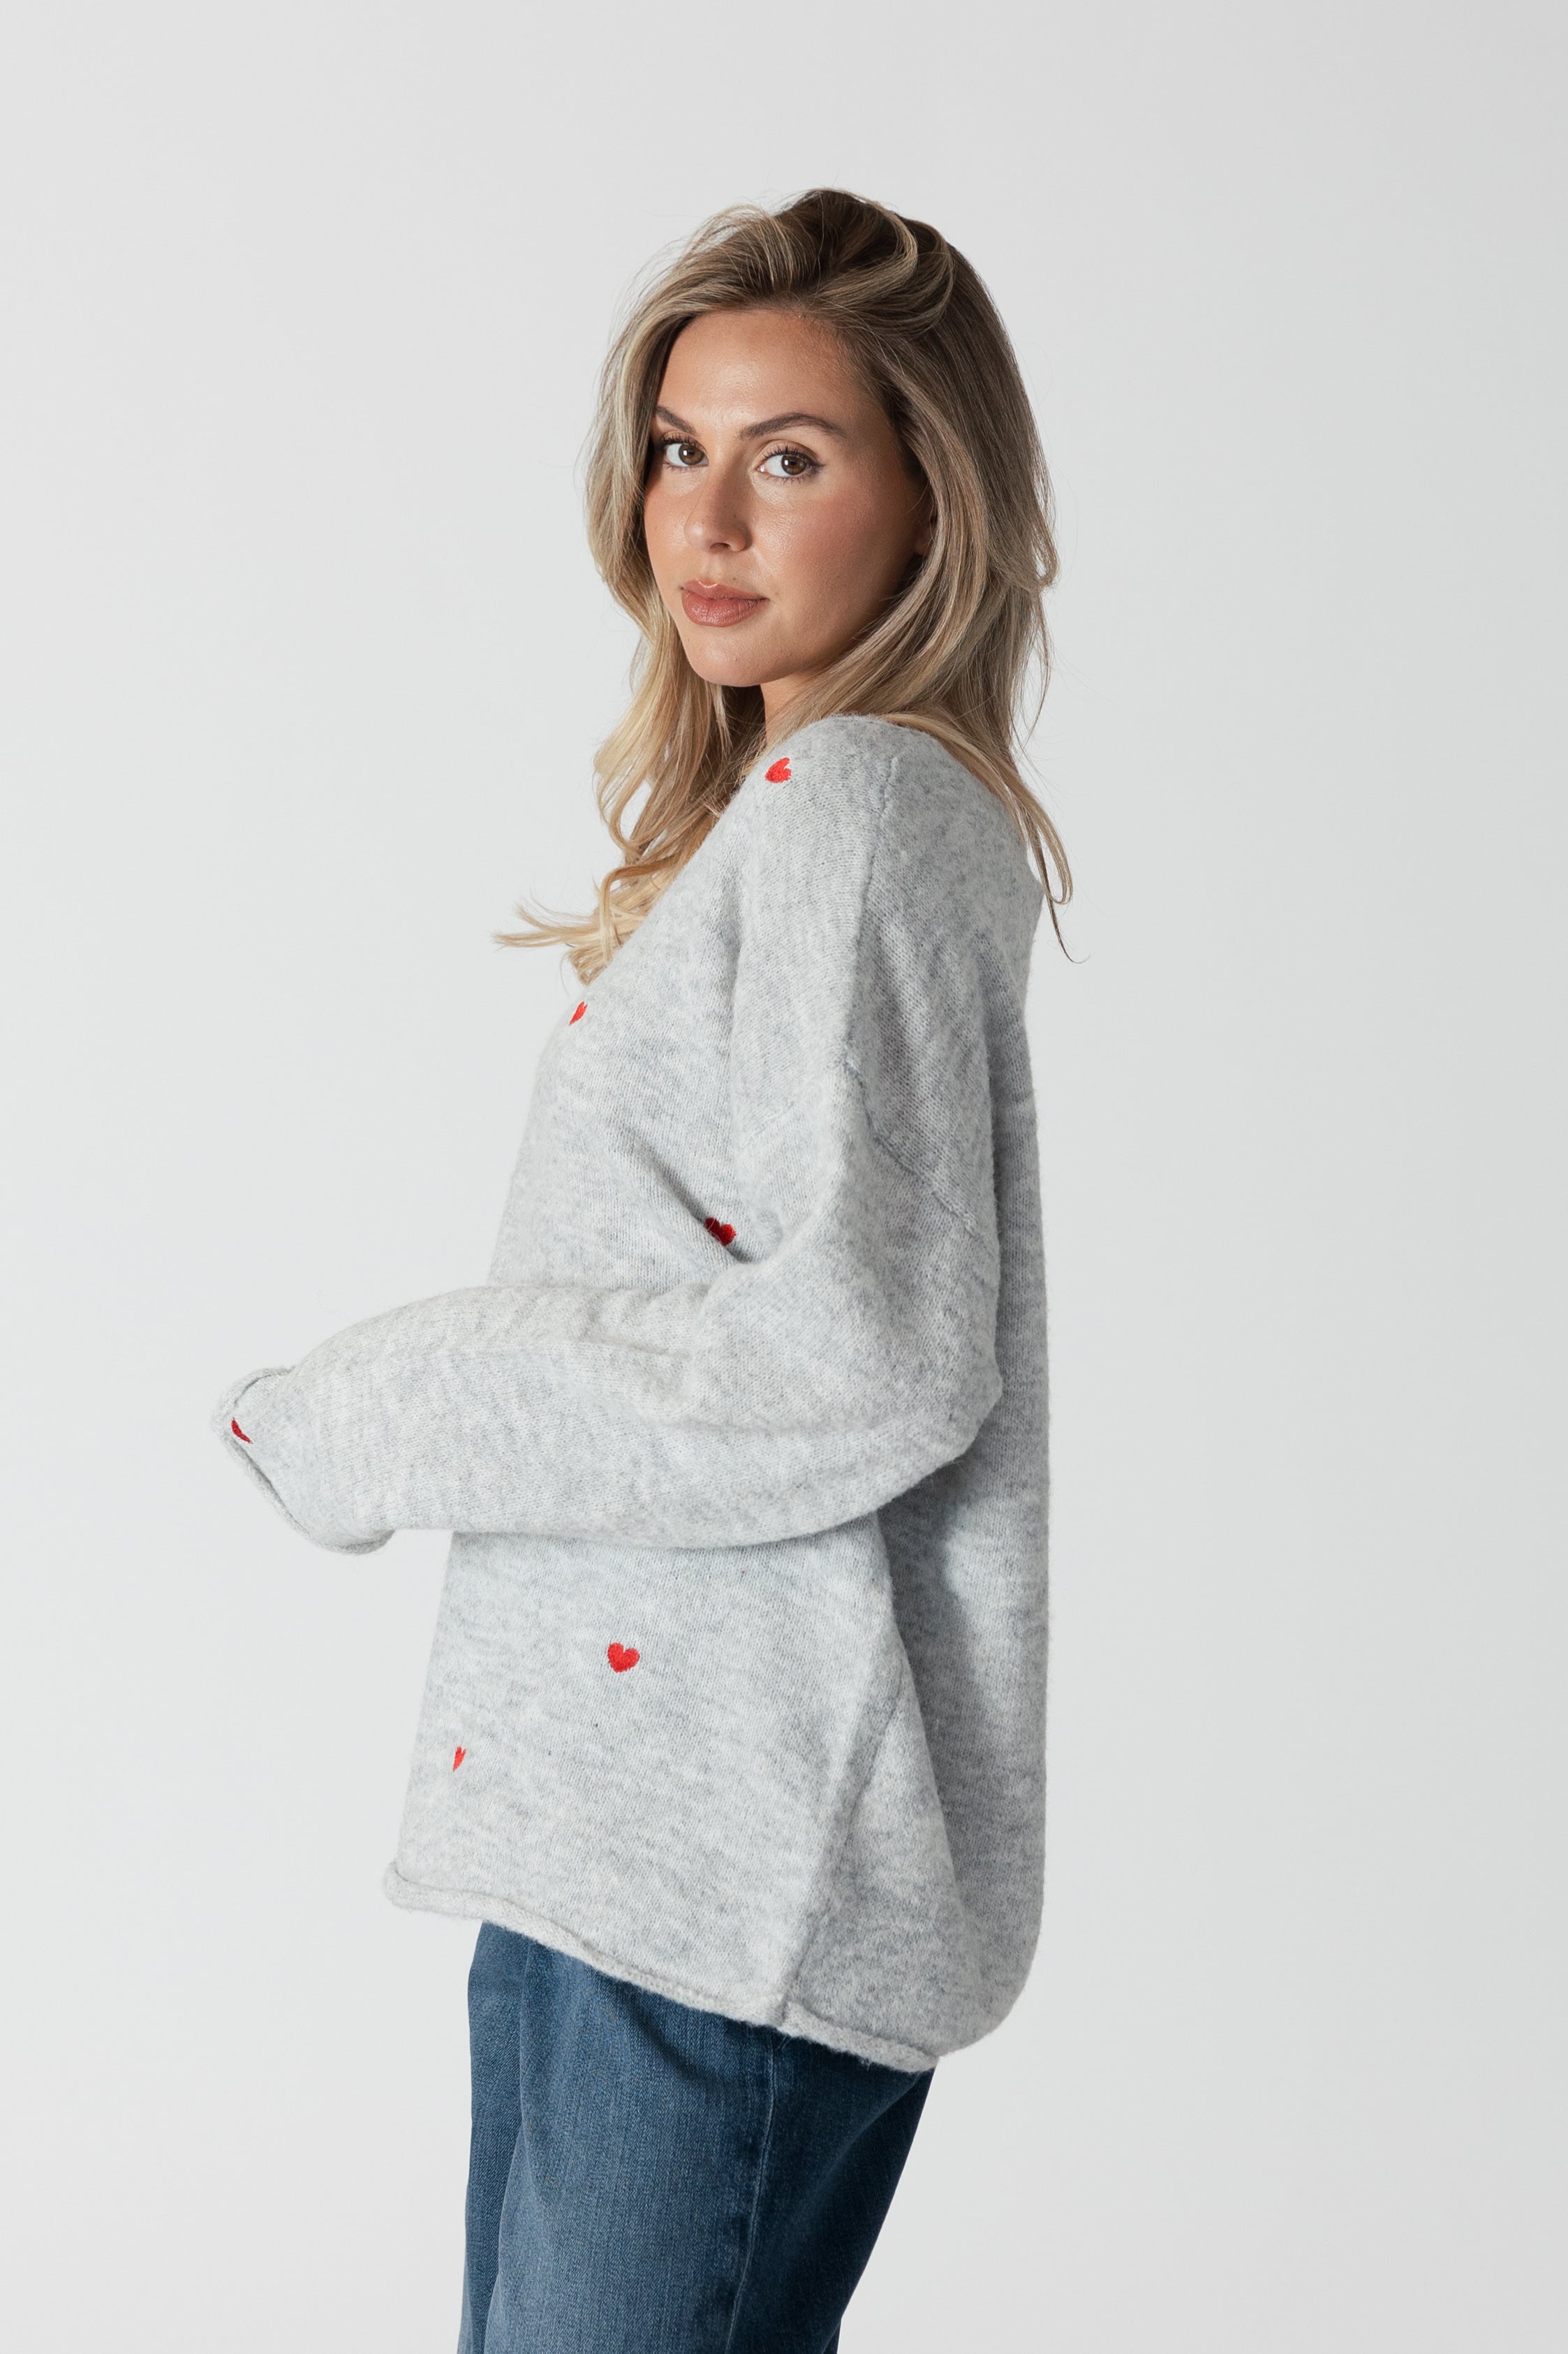 model wearing lyla & luxe luna v-neck embroidered hearts sweater, side view